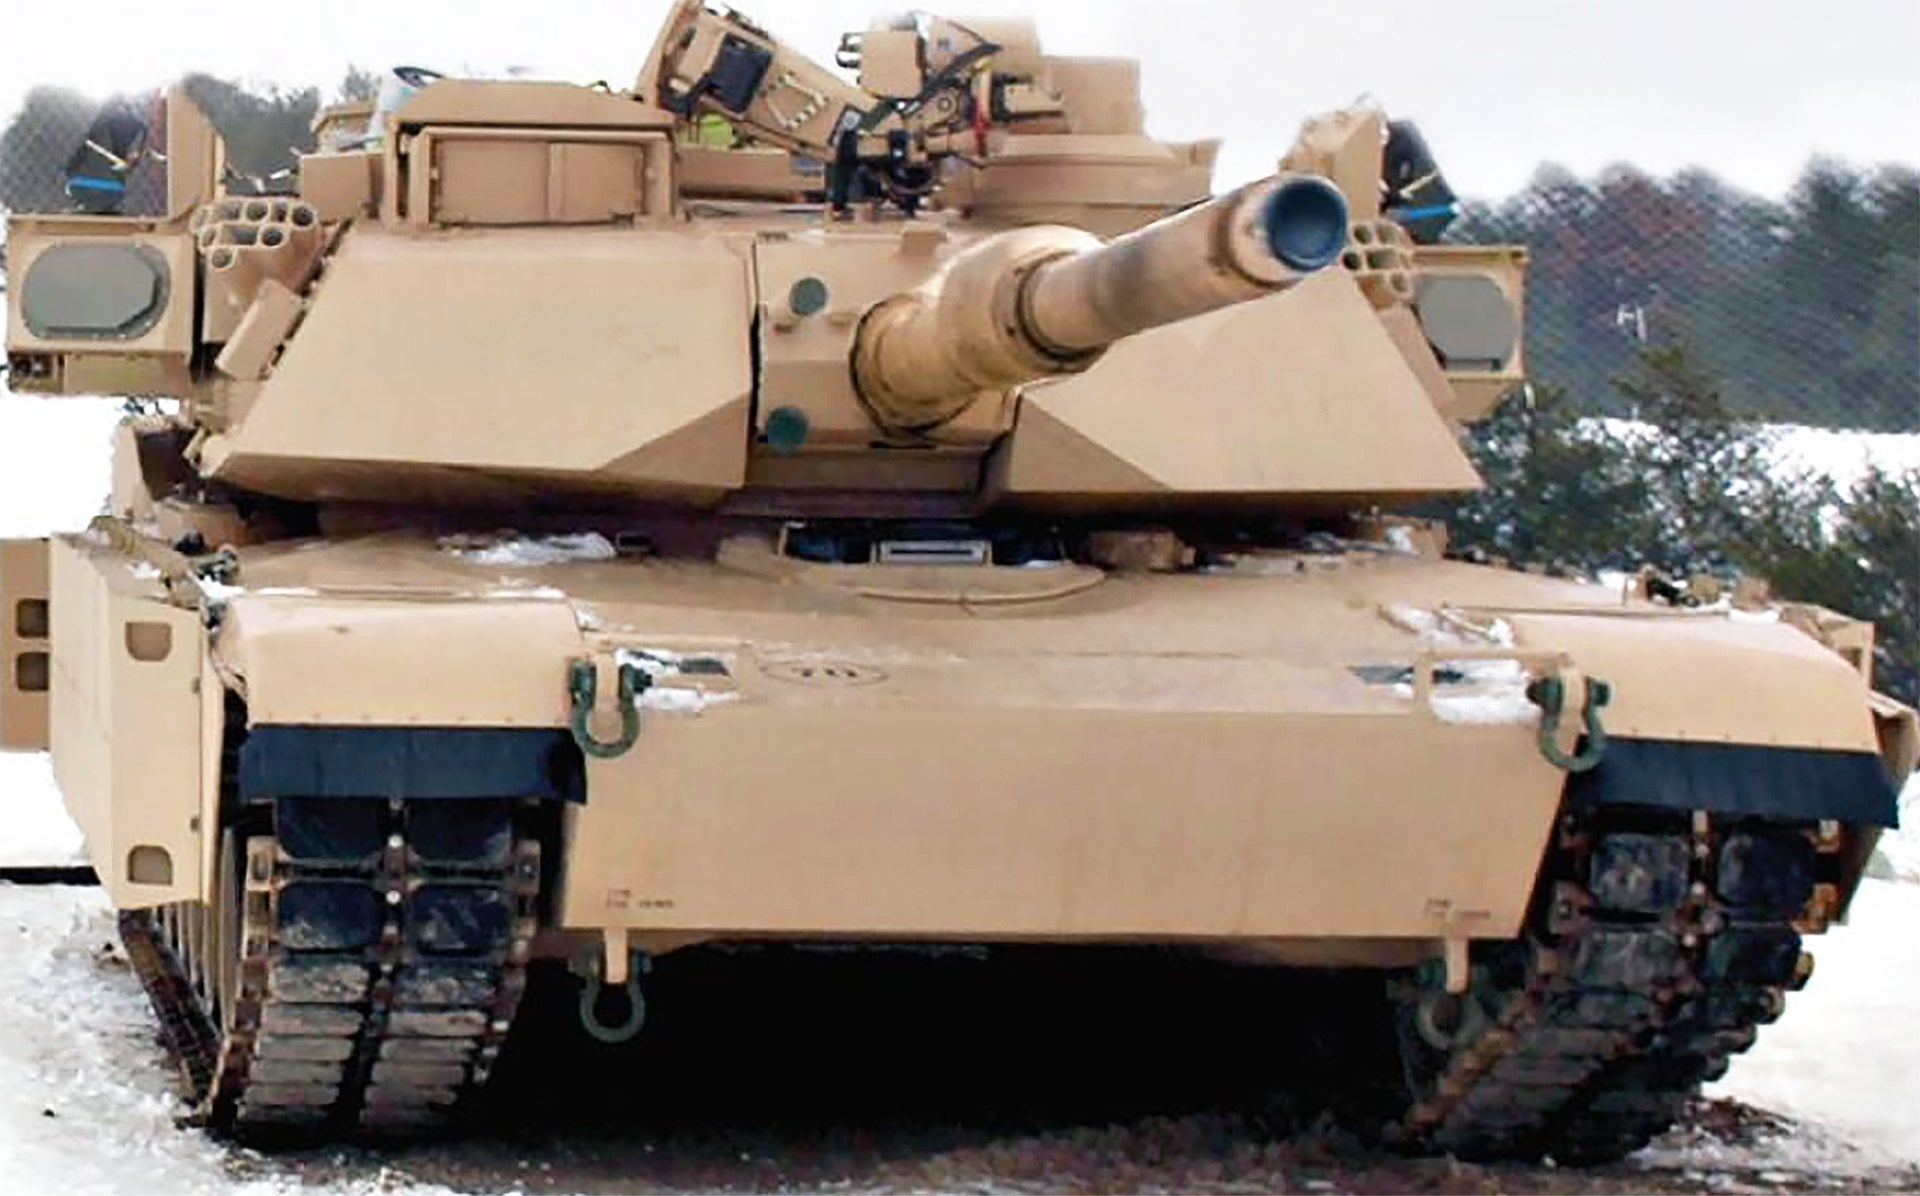 Images Emerge Of M1A2 Abrams Tank Equipped With Trophy Active Protection System